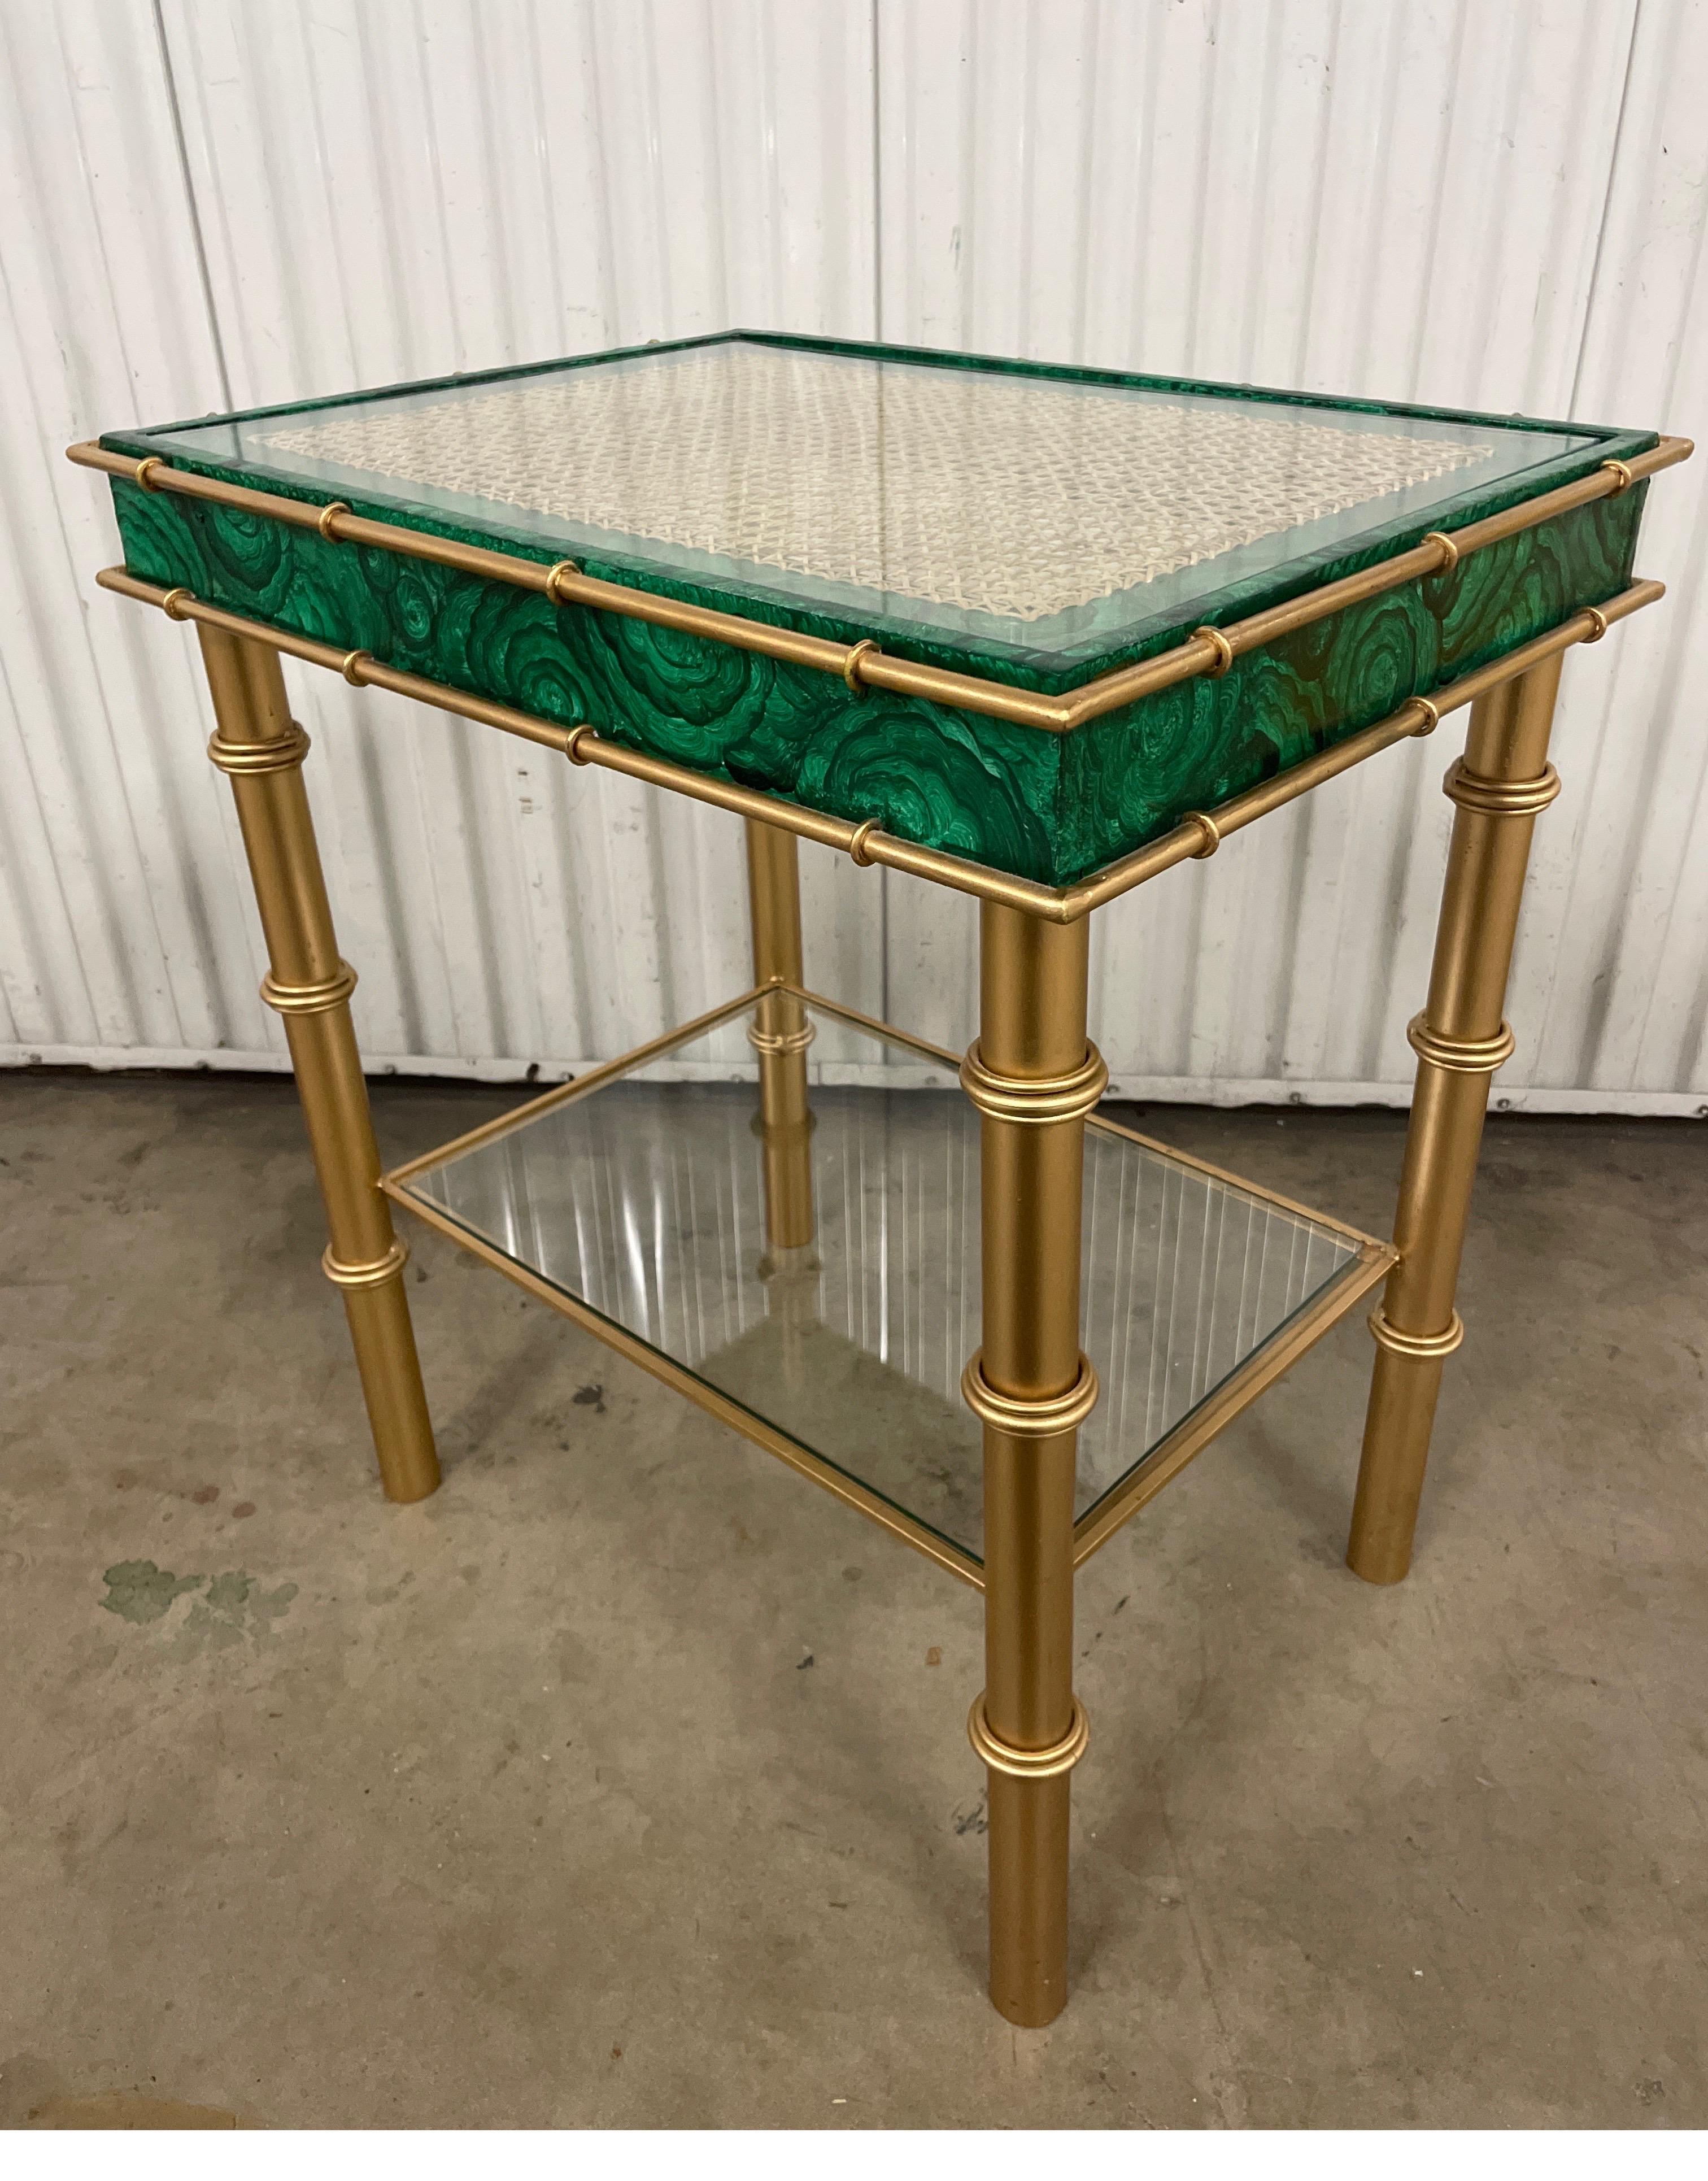 Faux hand painted malachite and gilt metal two-tiered side table. Top shelf has glass over cane & bottom shelf is glass alone. A pair is available.